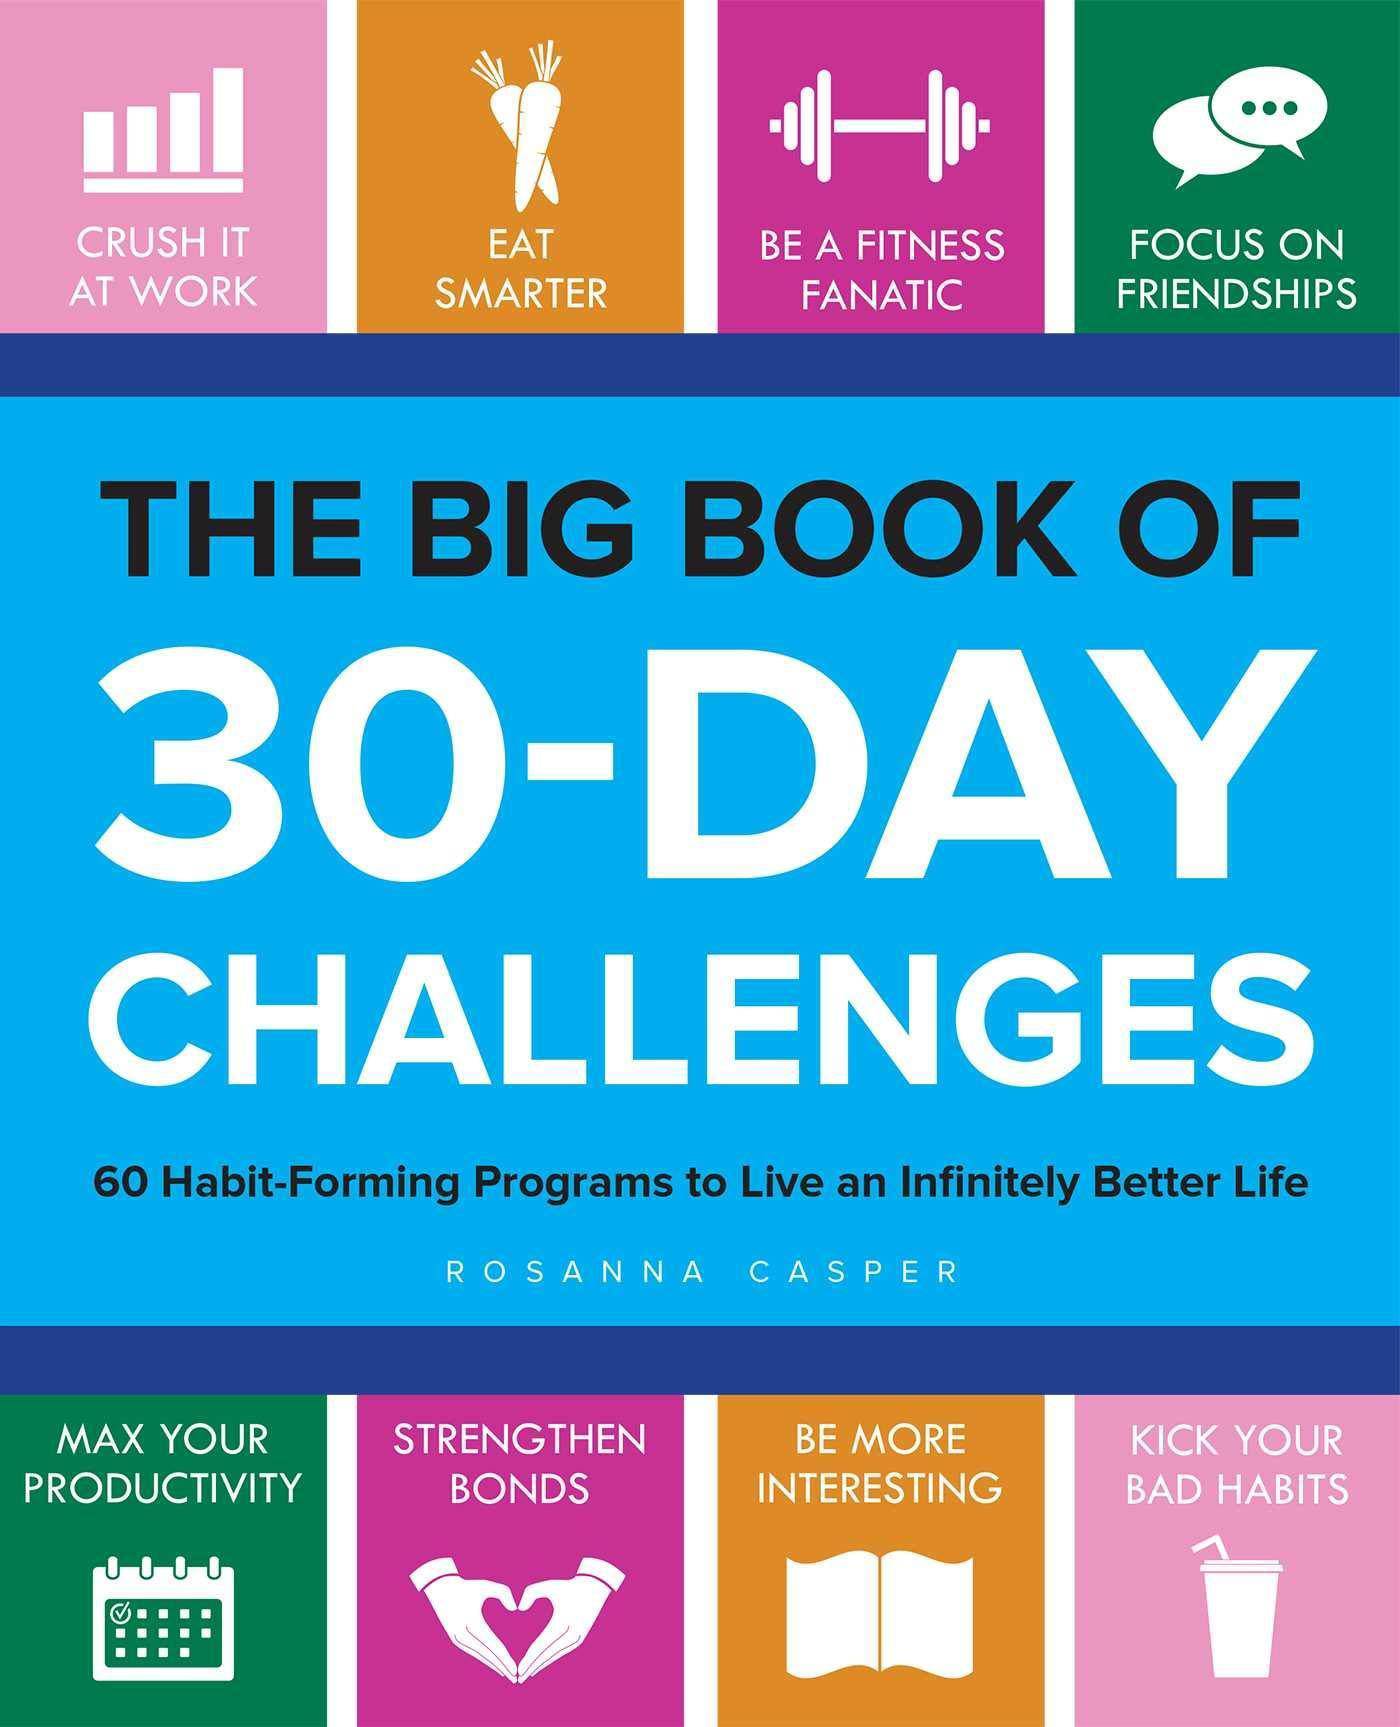 Big Book of 30-Day Challenges: 60 Habit-Forming Programs to Live - SureShot Books Publishing LLC